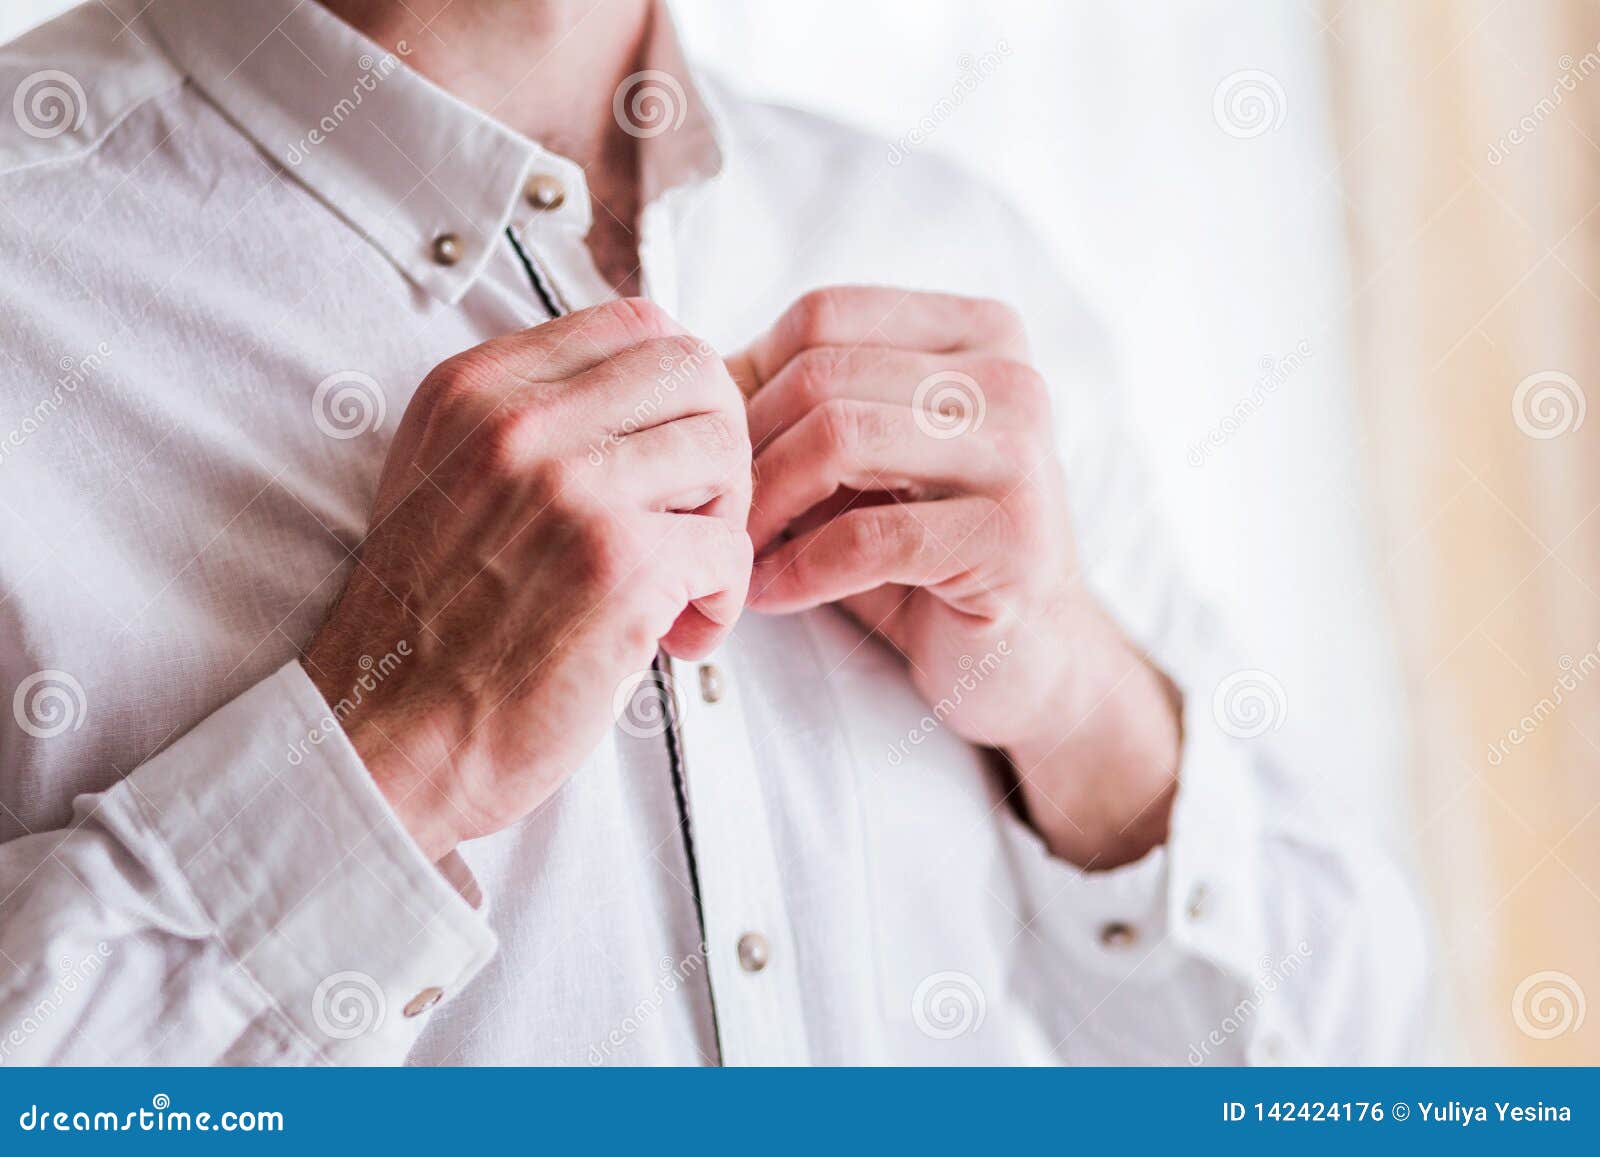 Snazzy Matematisk Synslinie Man Buttoning the Top Button on the Shirt Stock Photo - Image of indoors,  inside: 142424176